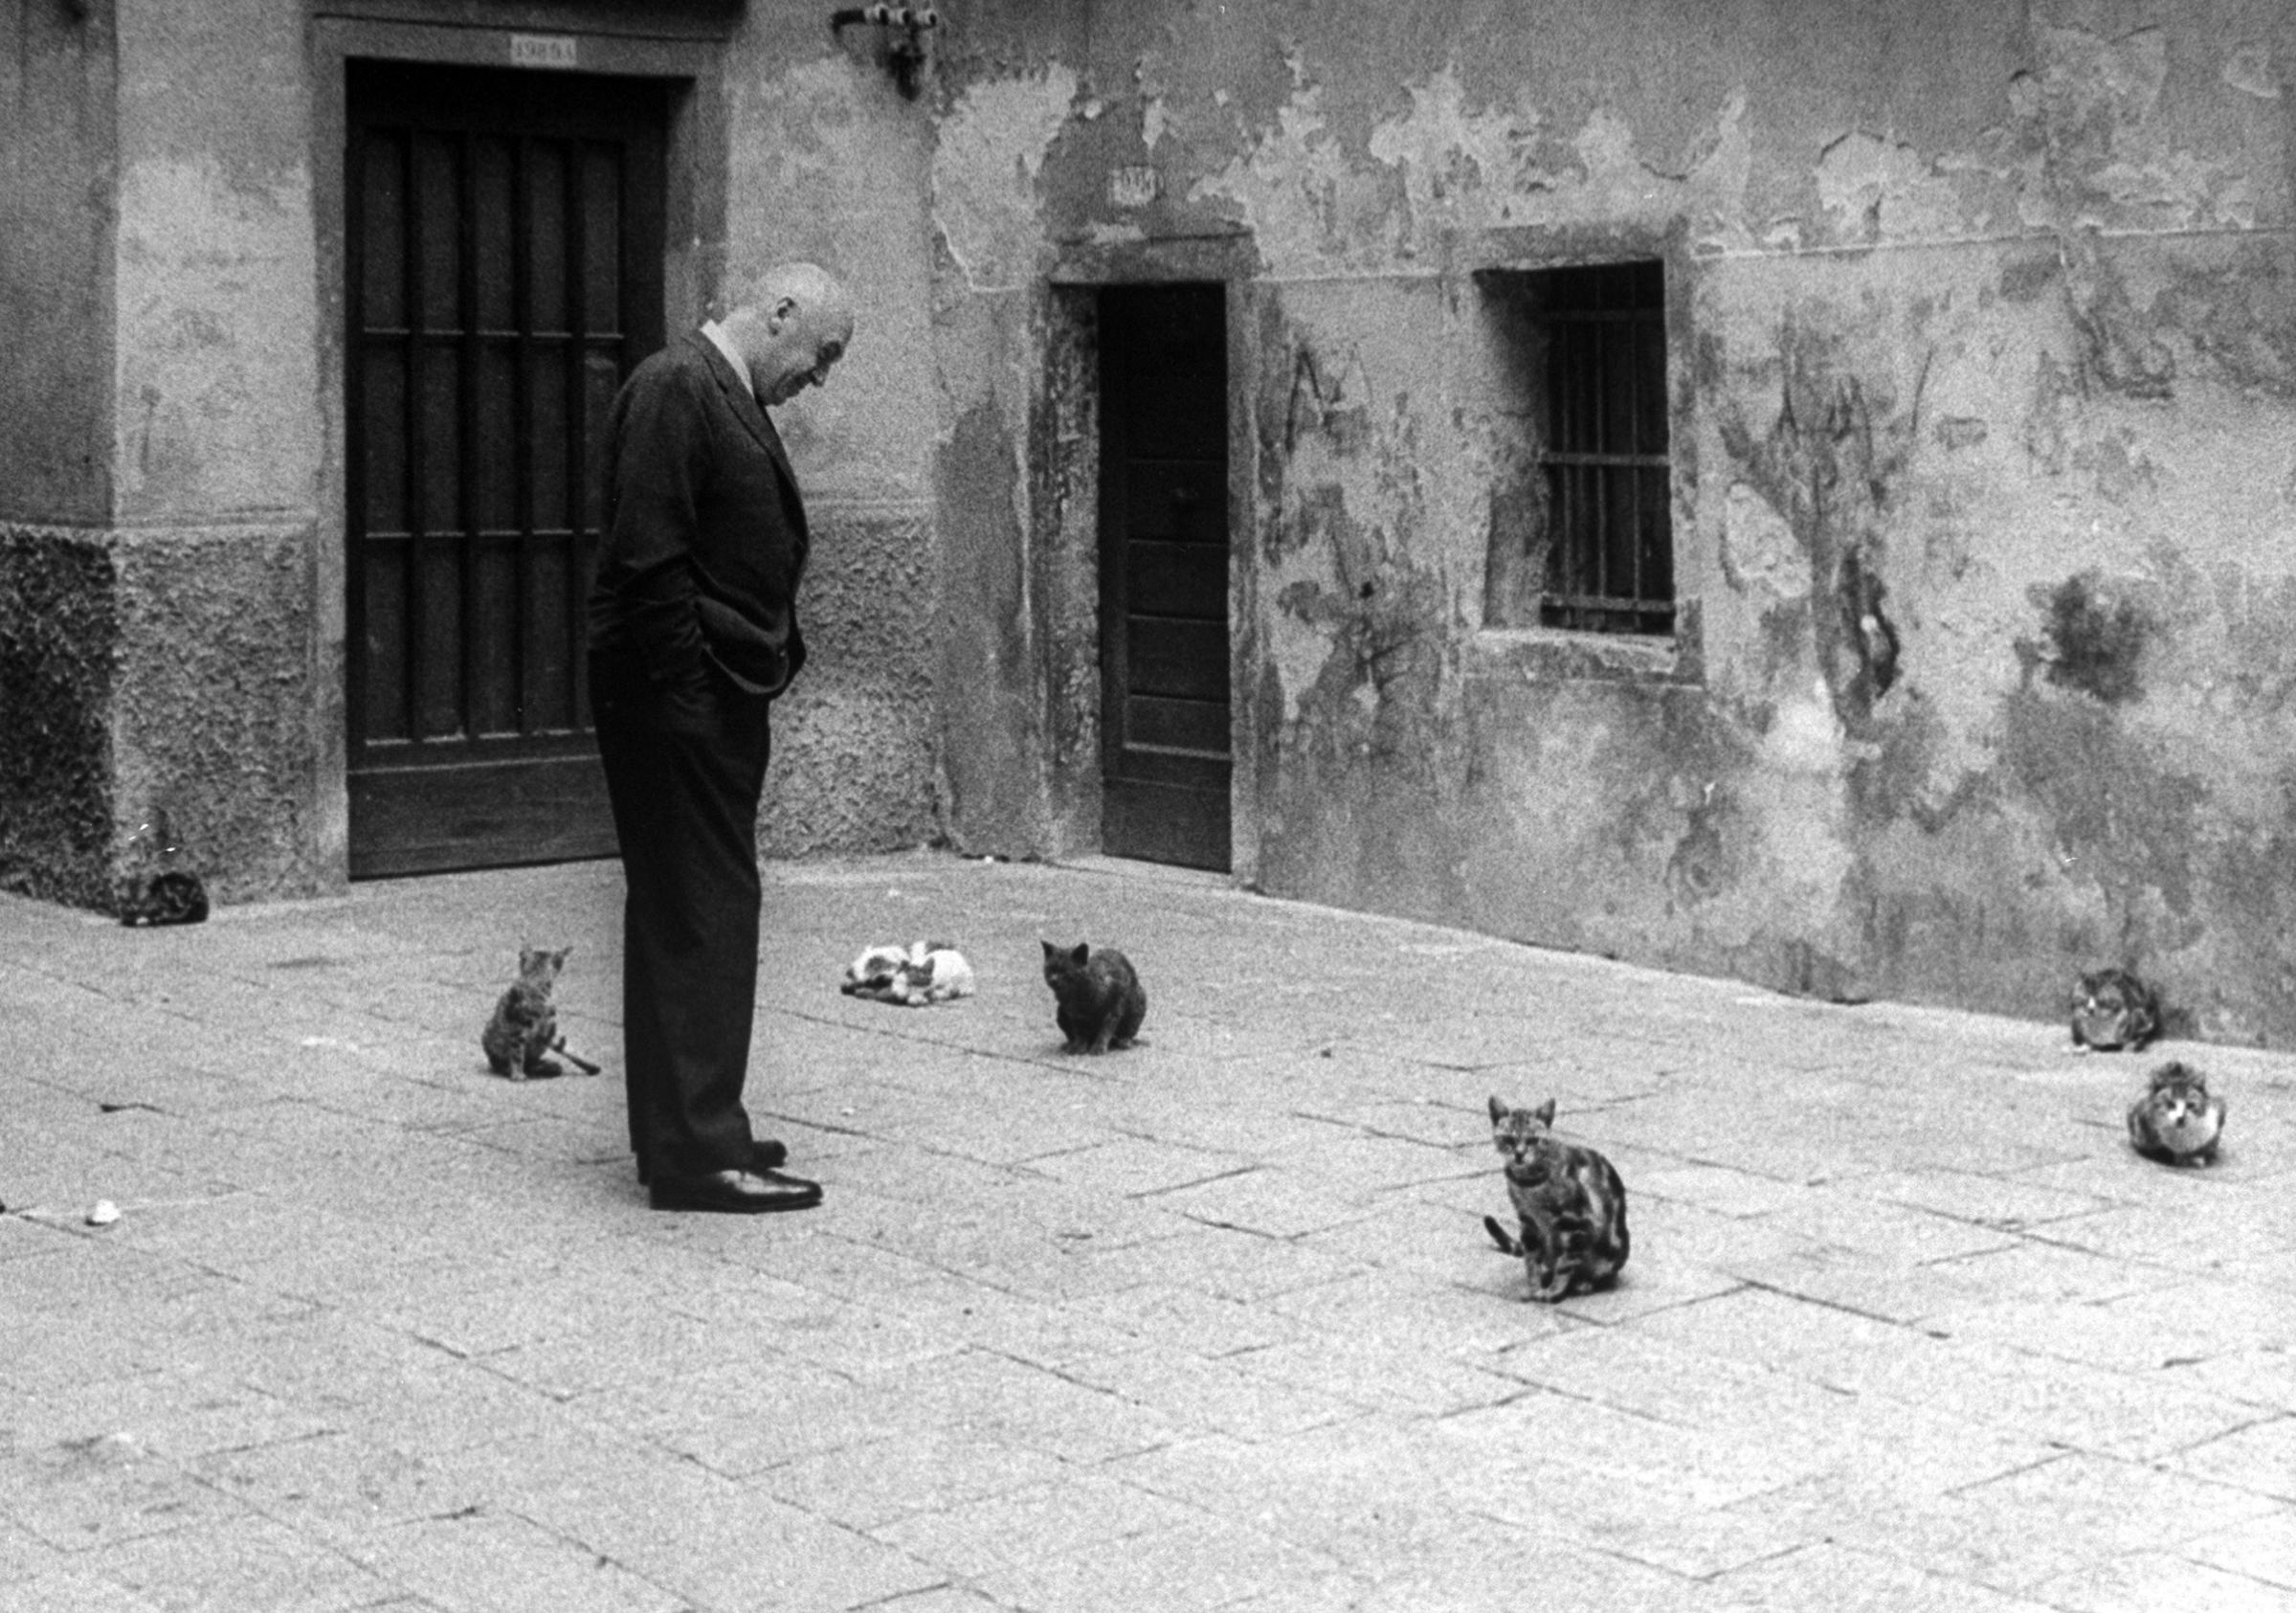 Otto Preminger looking at stray cats on Venice street while attending Venice Film Festival at which his film "Anatomy of a Murder" was shown, 1959.